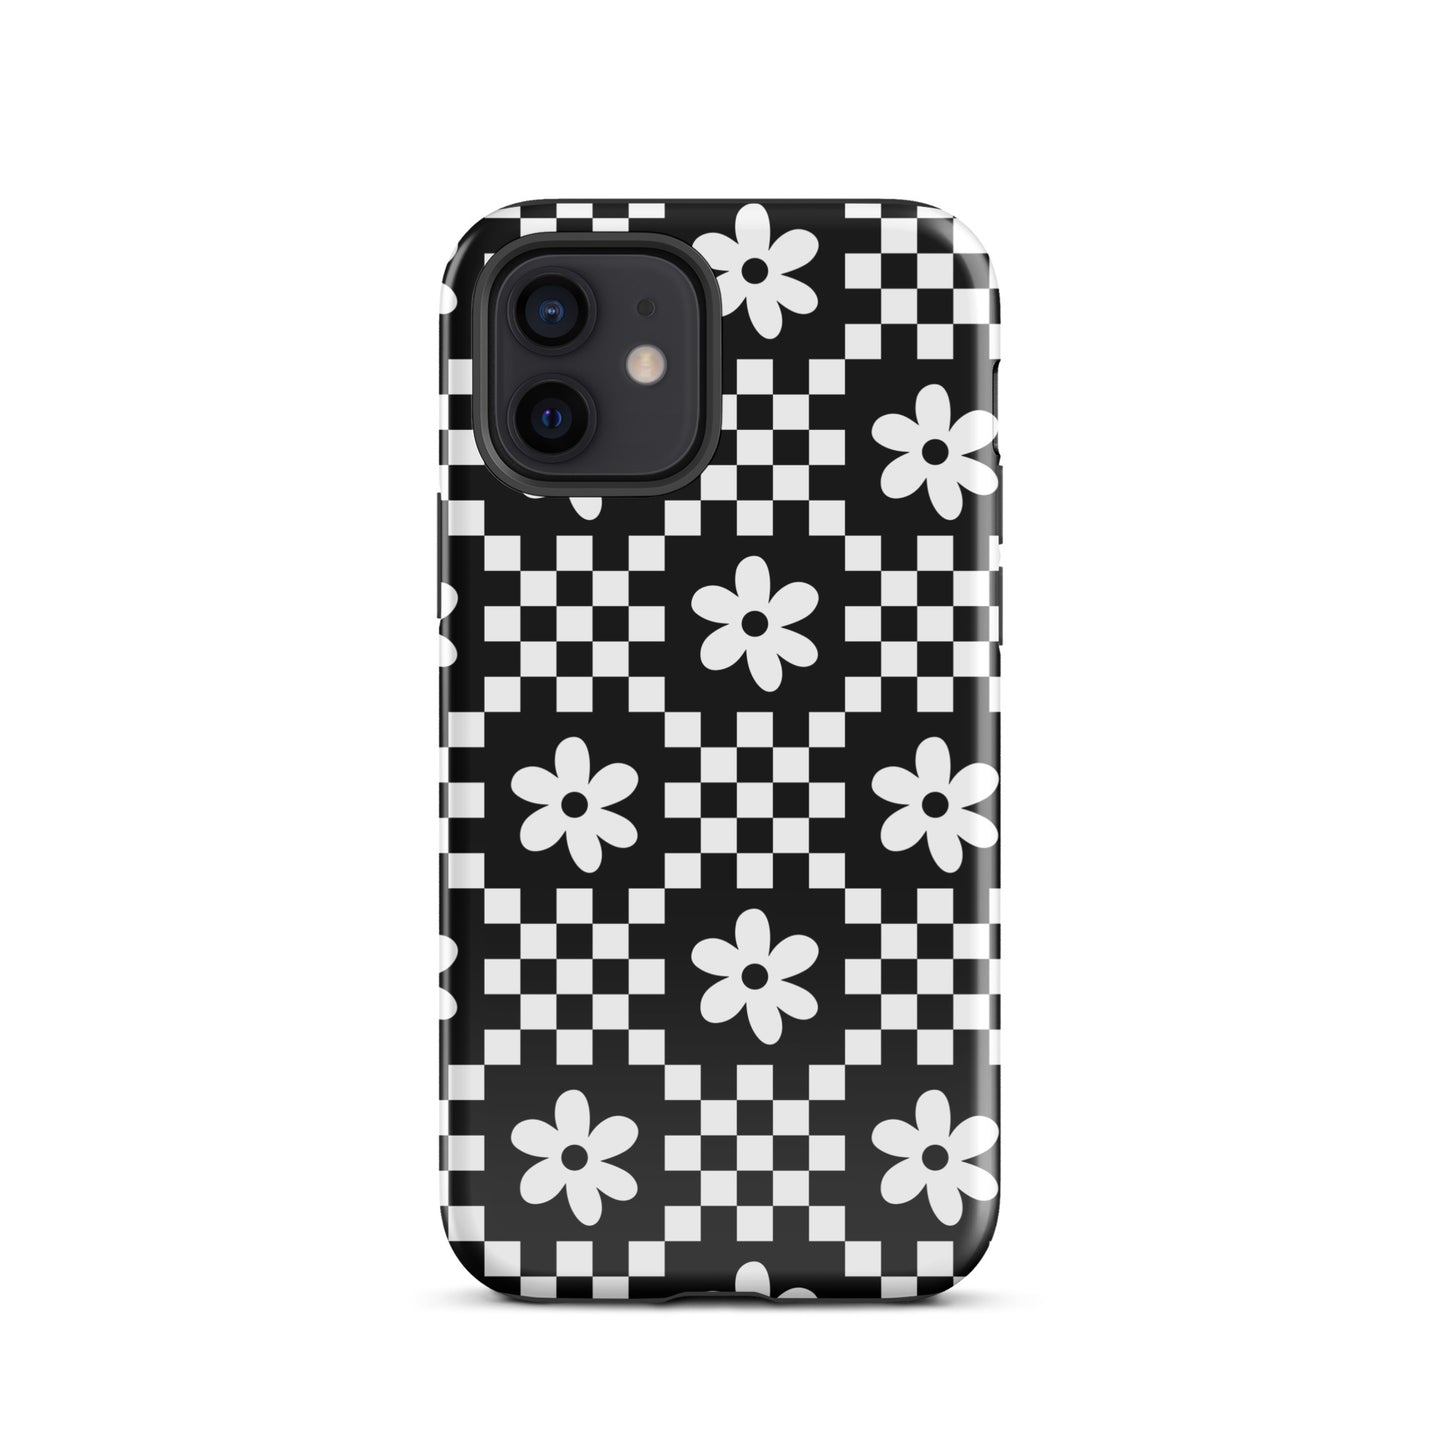 Checkerboard Daisy iPhone Case iPhone 12 Glossy